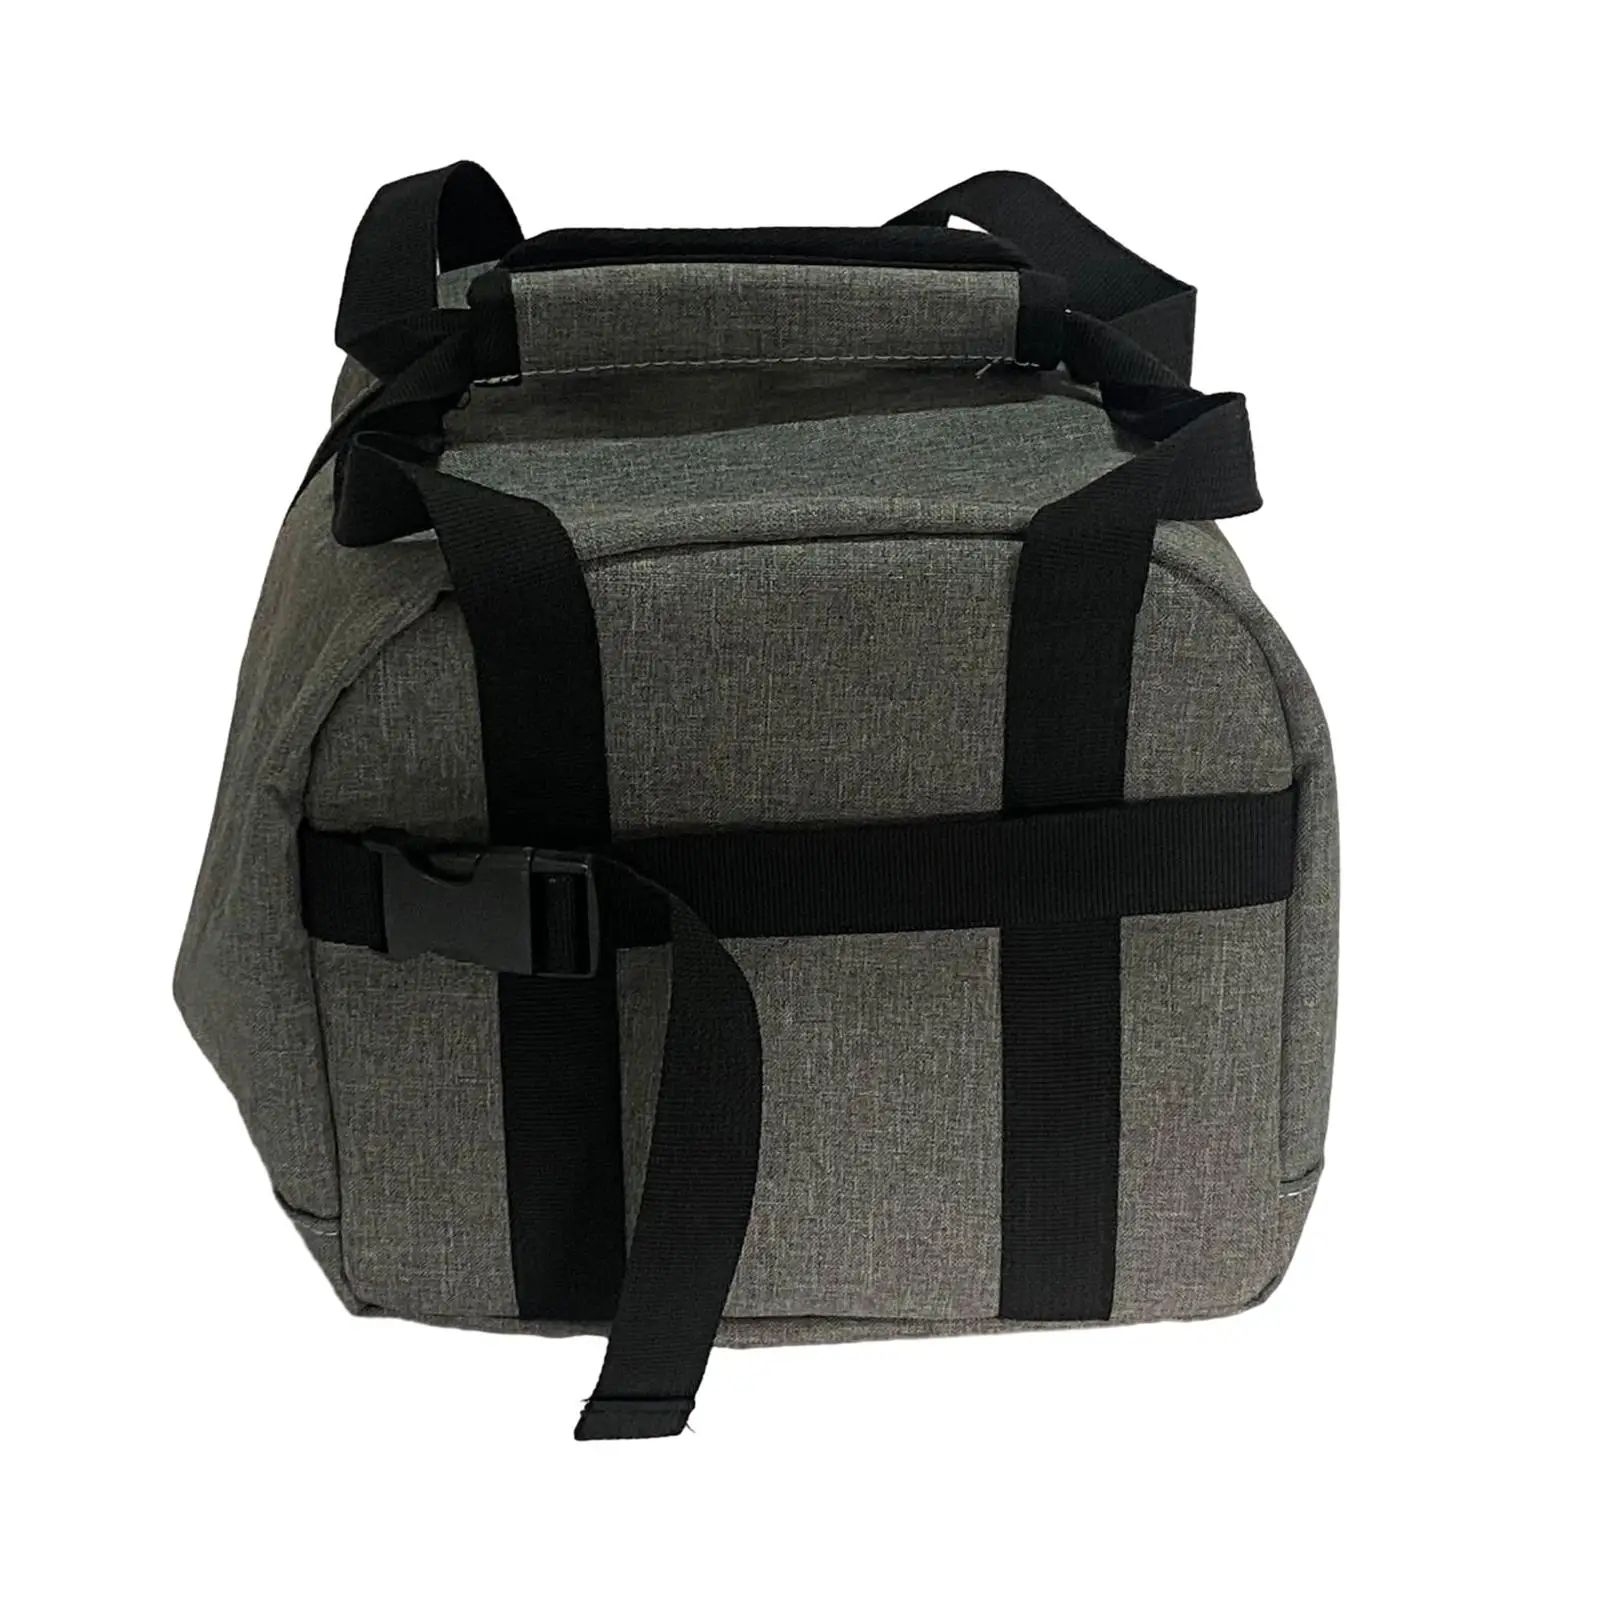 Single Bowling Ball Bag Adjustable Strap Oxford Fabric Durable with External